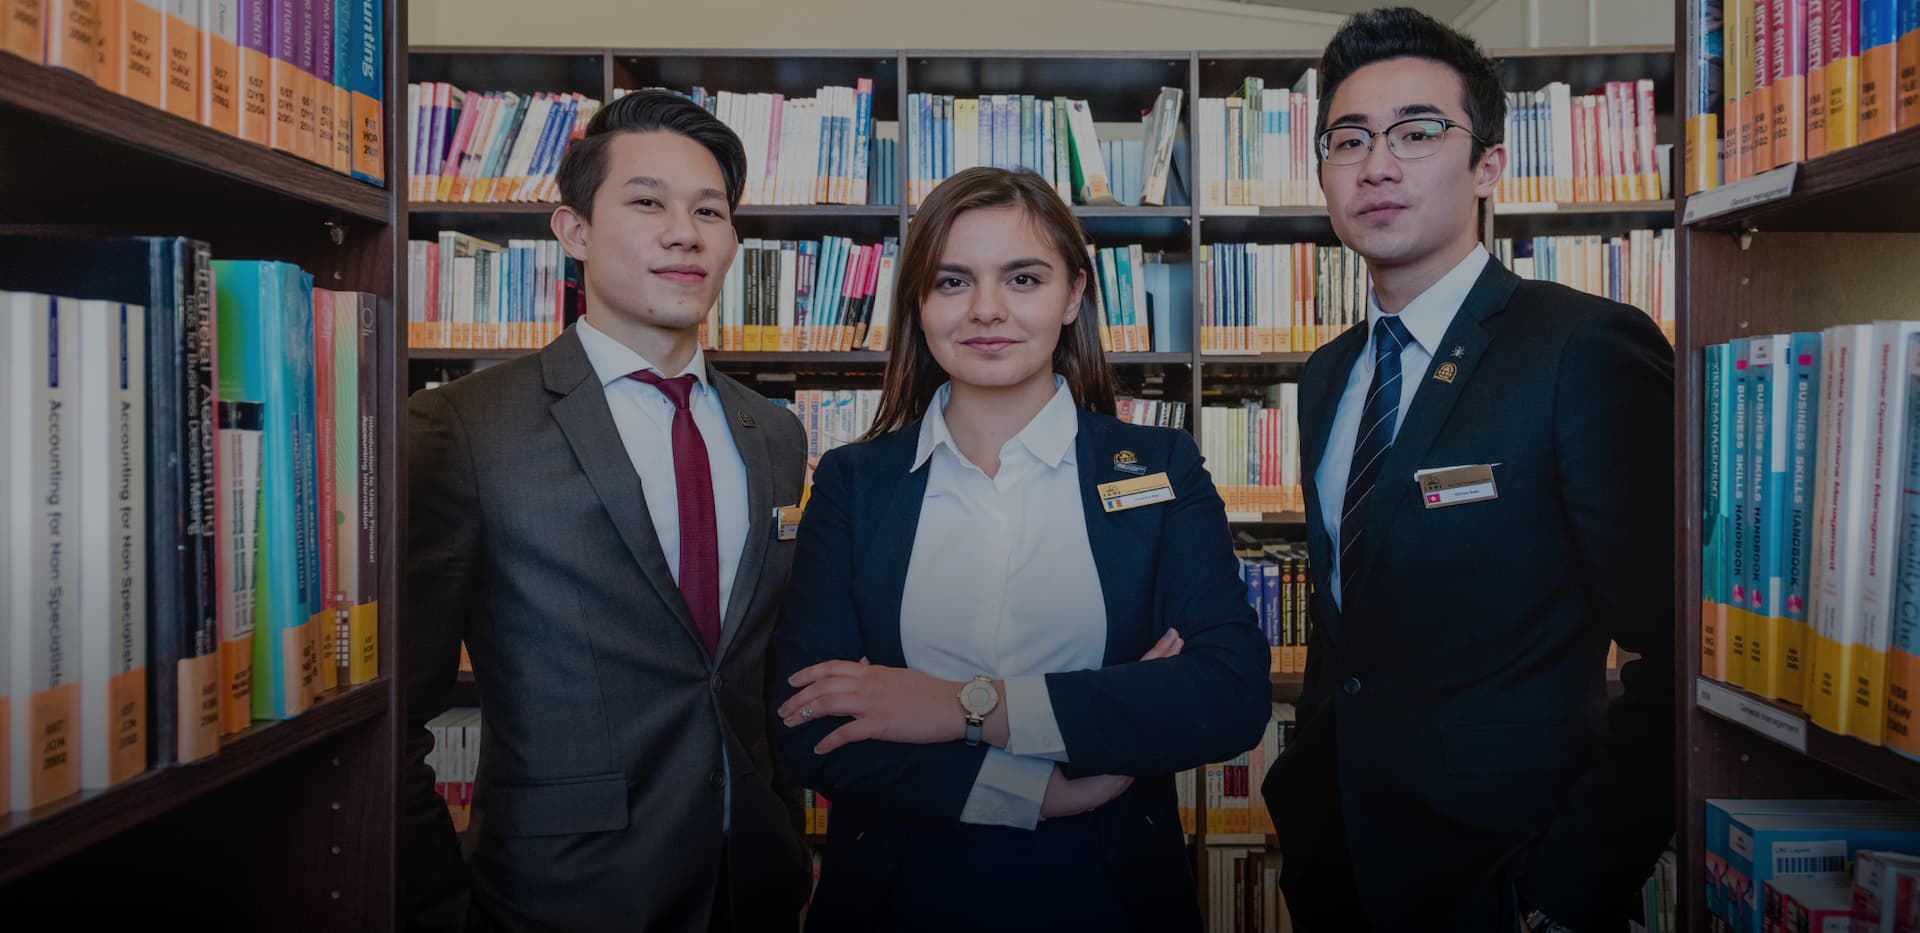 Admissions at Swiss Hotel Management School